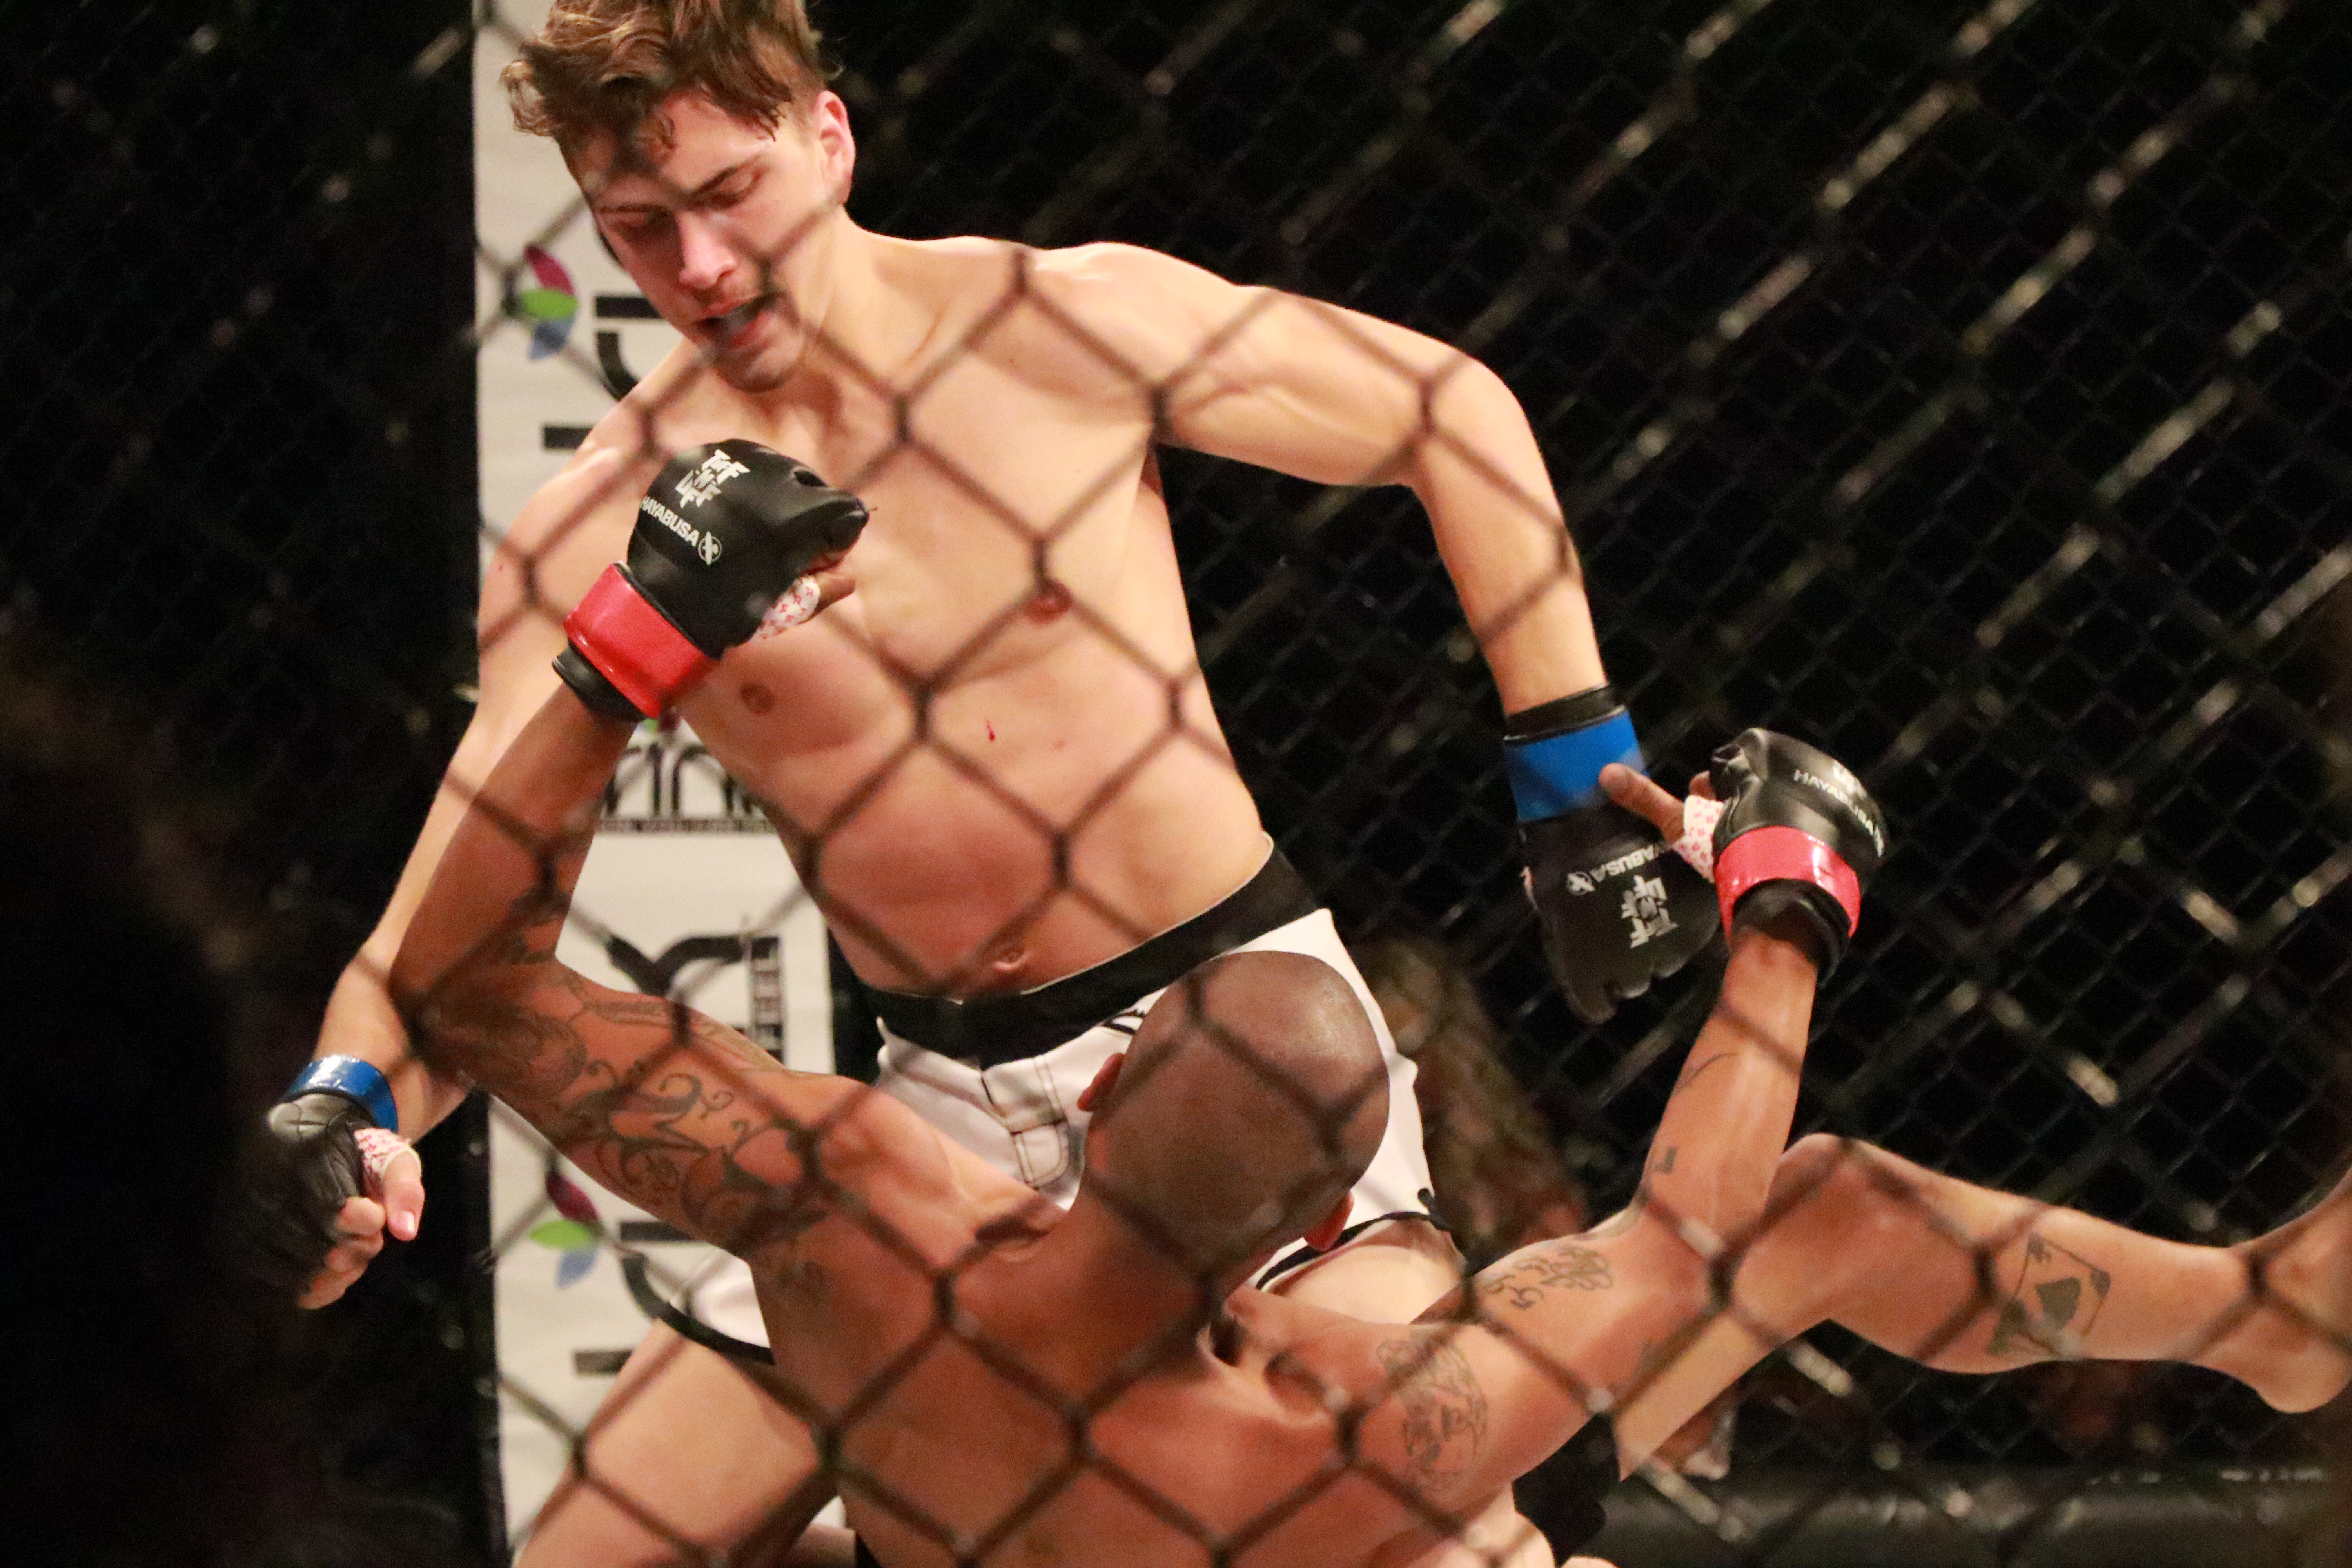 ‘mayhem In Mesquite Xiv A Memorable Night Of Action For Mma Fight Fans 